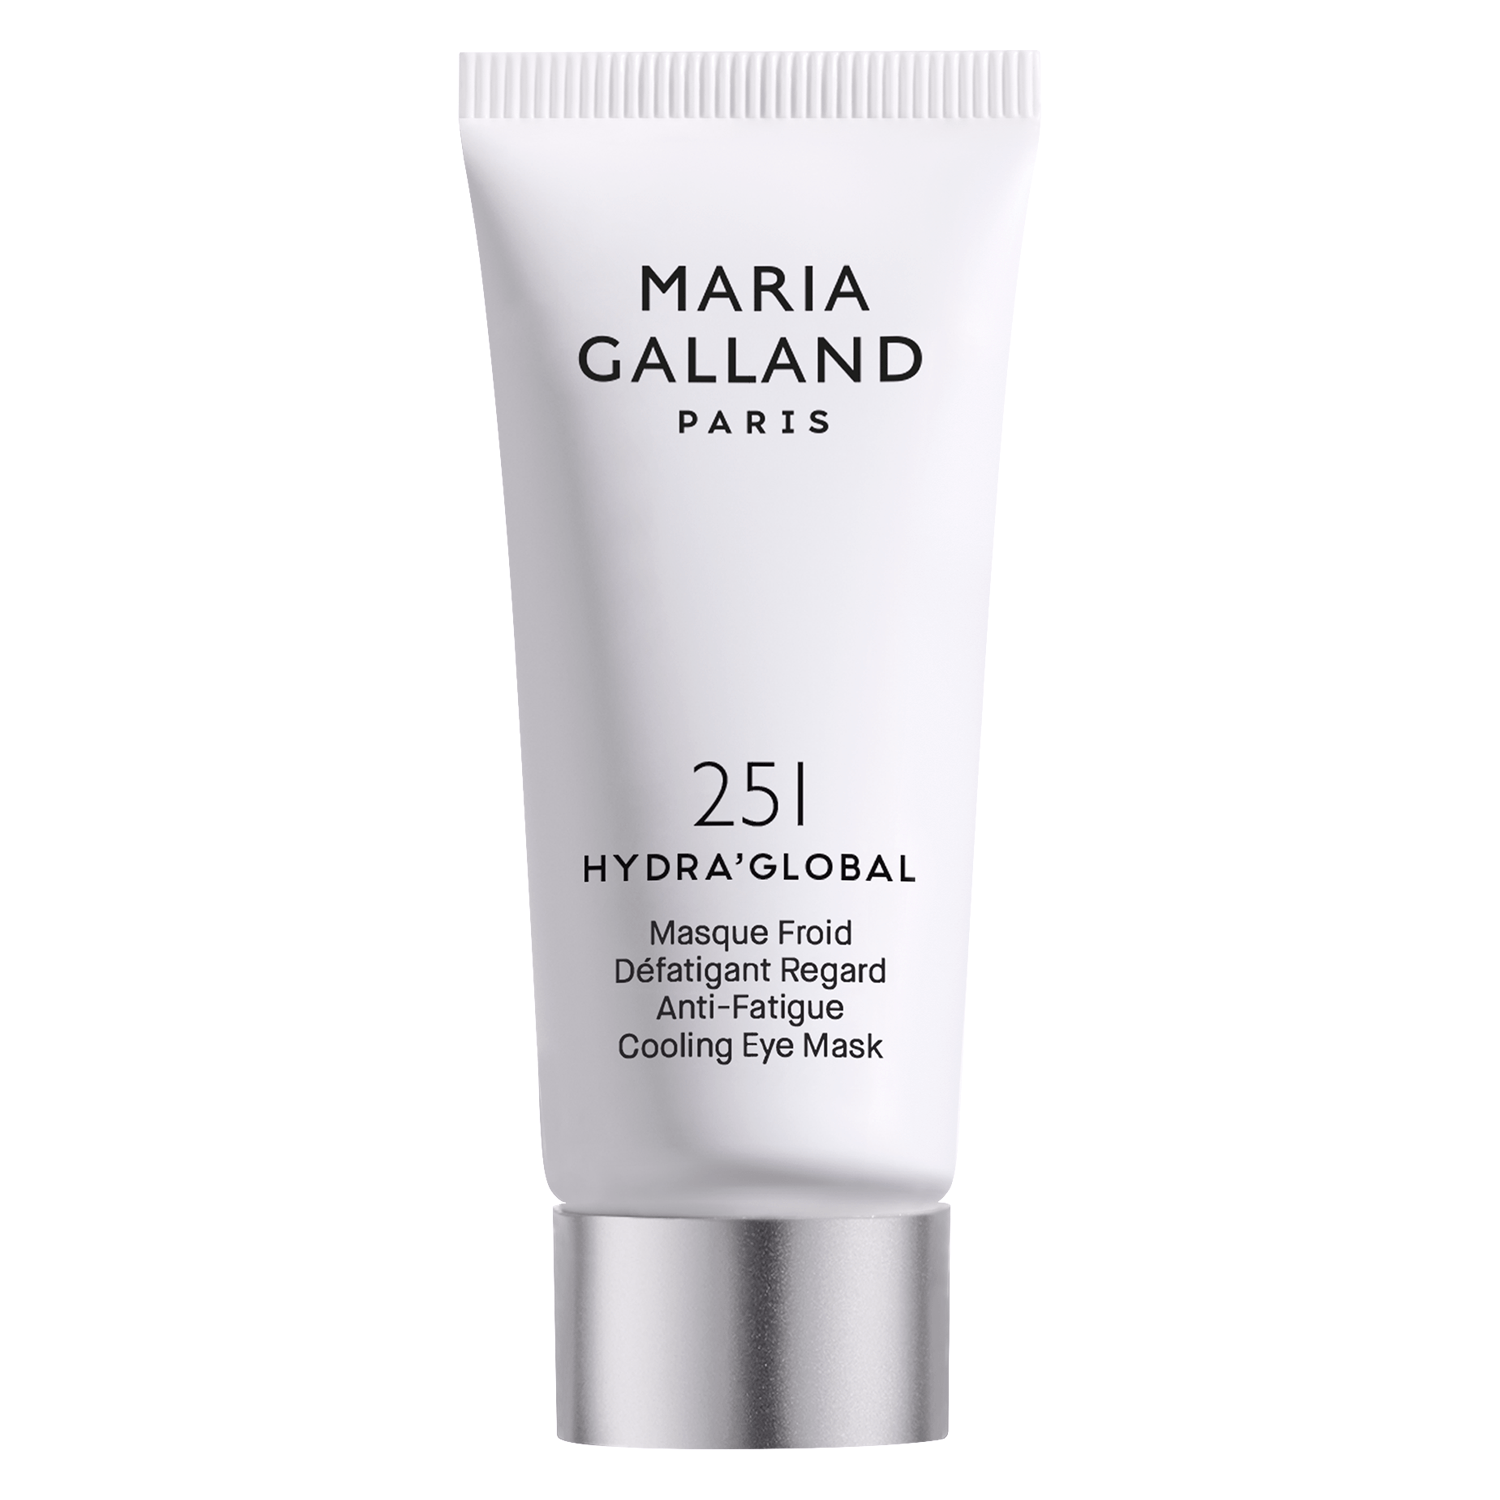 Product image from Hydra'Global - 251 Anti-Fatigue Cooling Eye Mask